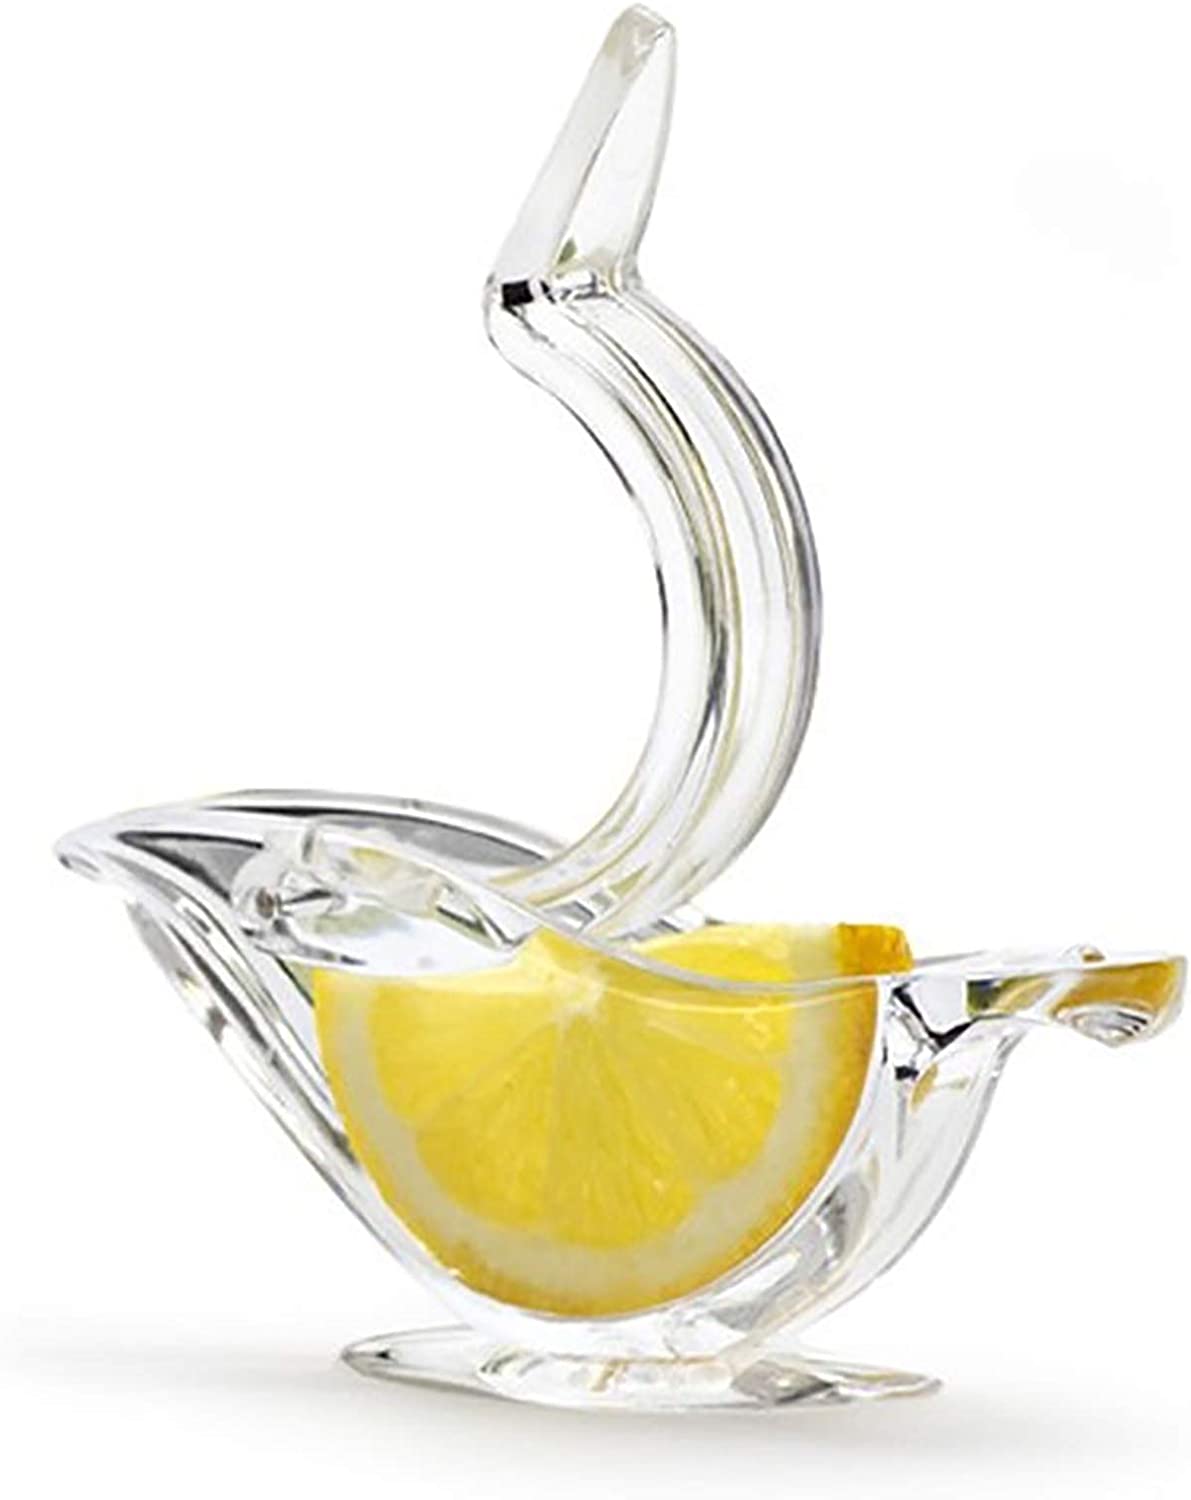 (Last Day Promotion - 50% OFF) Acrylic Lemon Squeezer, BUY 5 GET 3 FREE & FREE SHIPPING